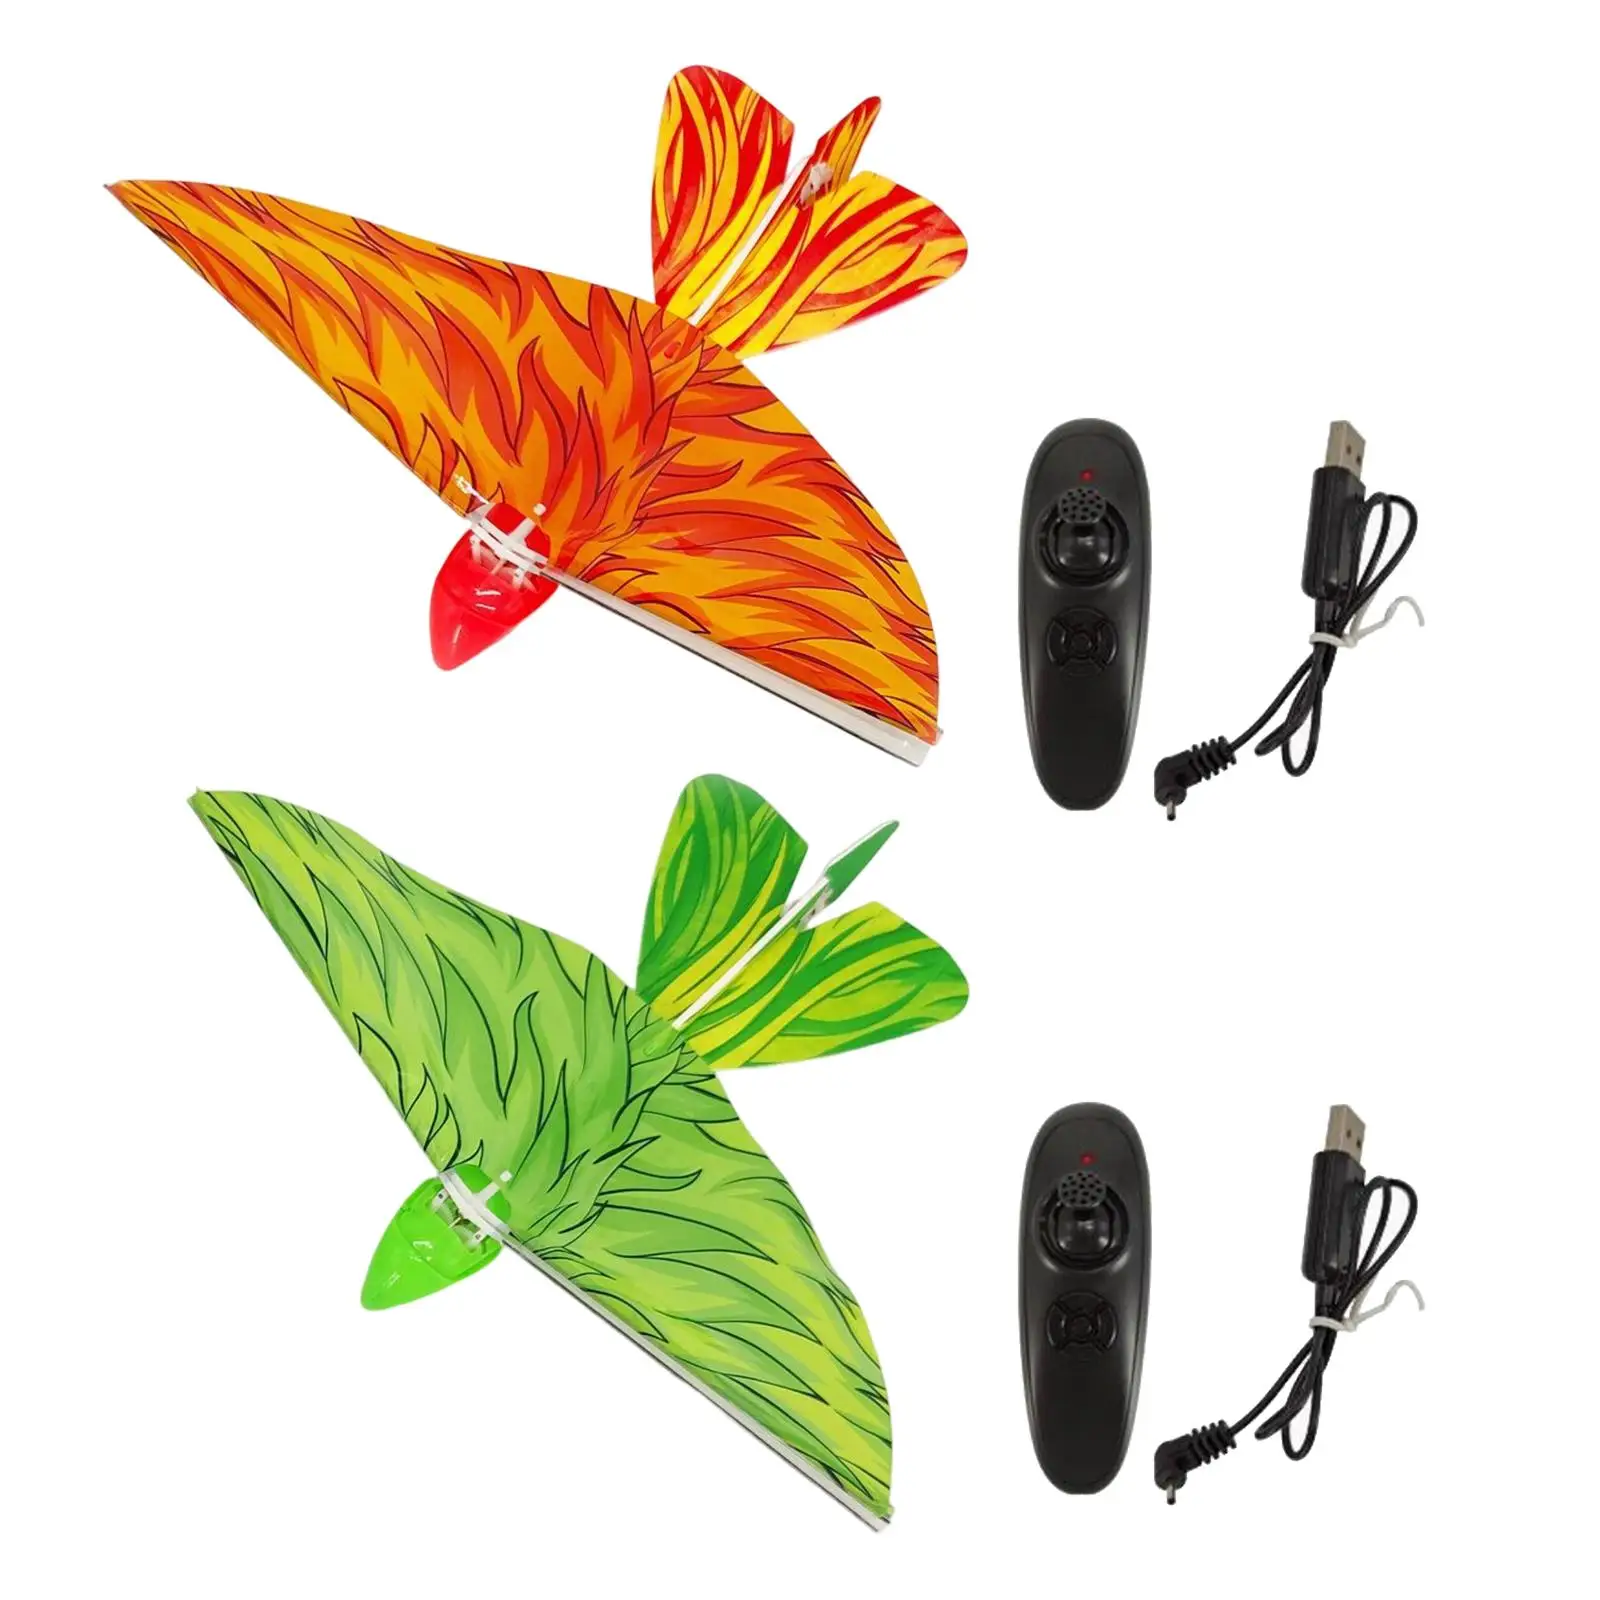 Remote Control Flying Toys Altitude Hold for Beginners Outdoor Game